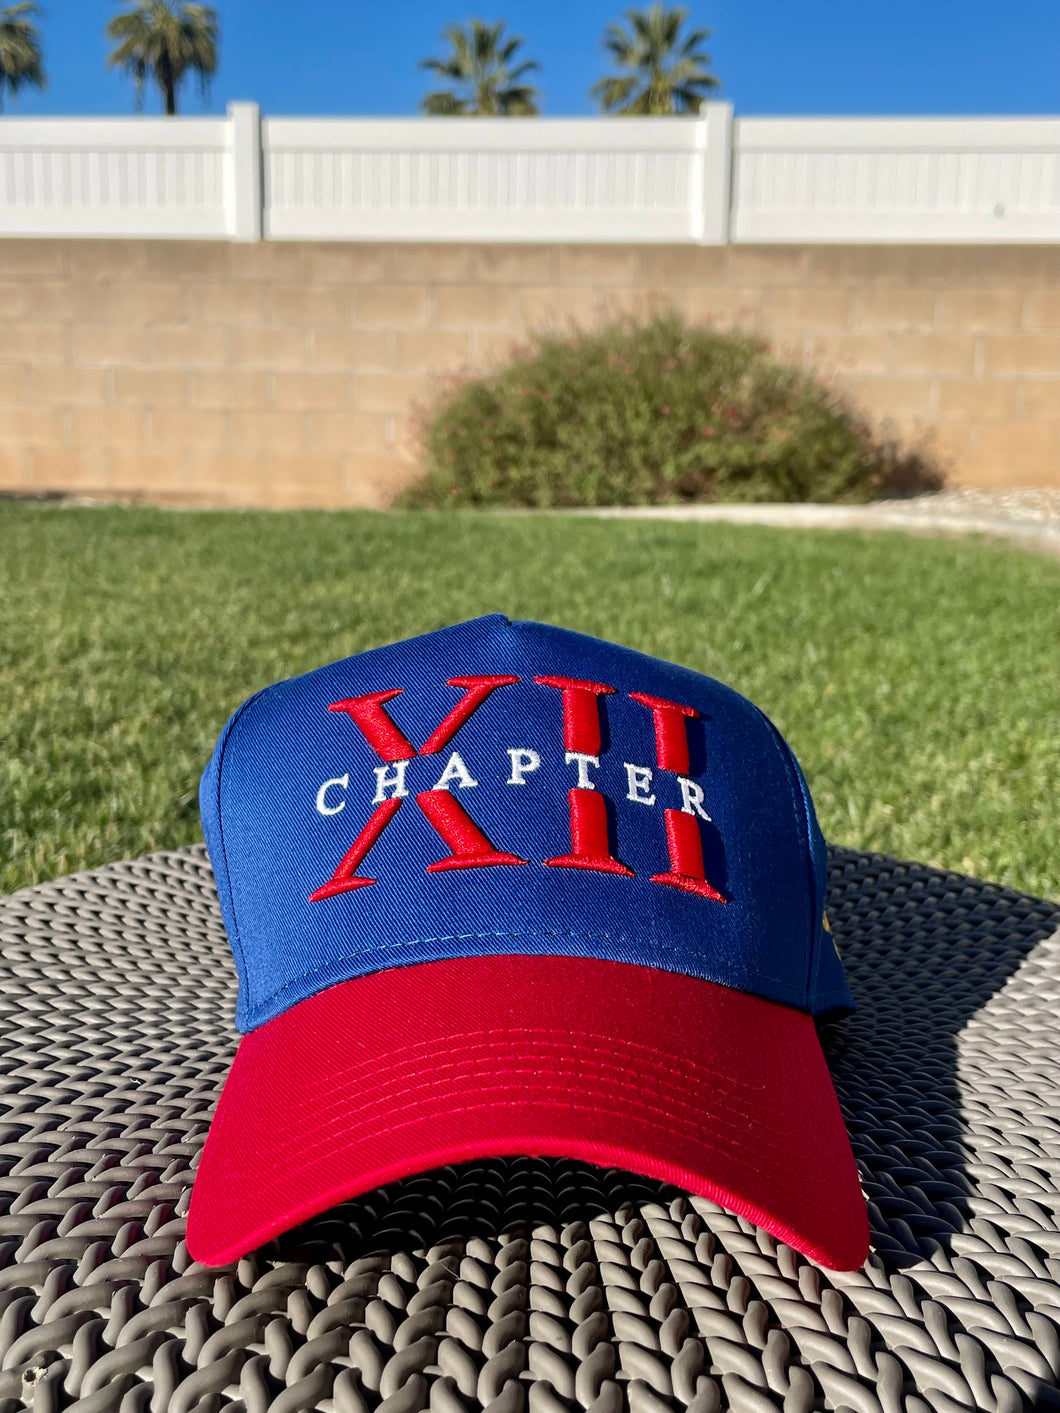 Royalty Chapter XII Snapback Hat